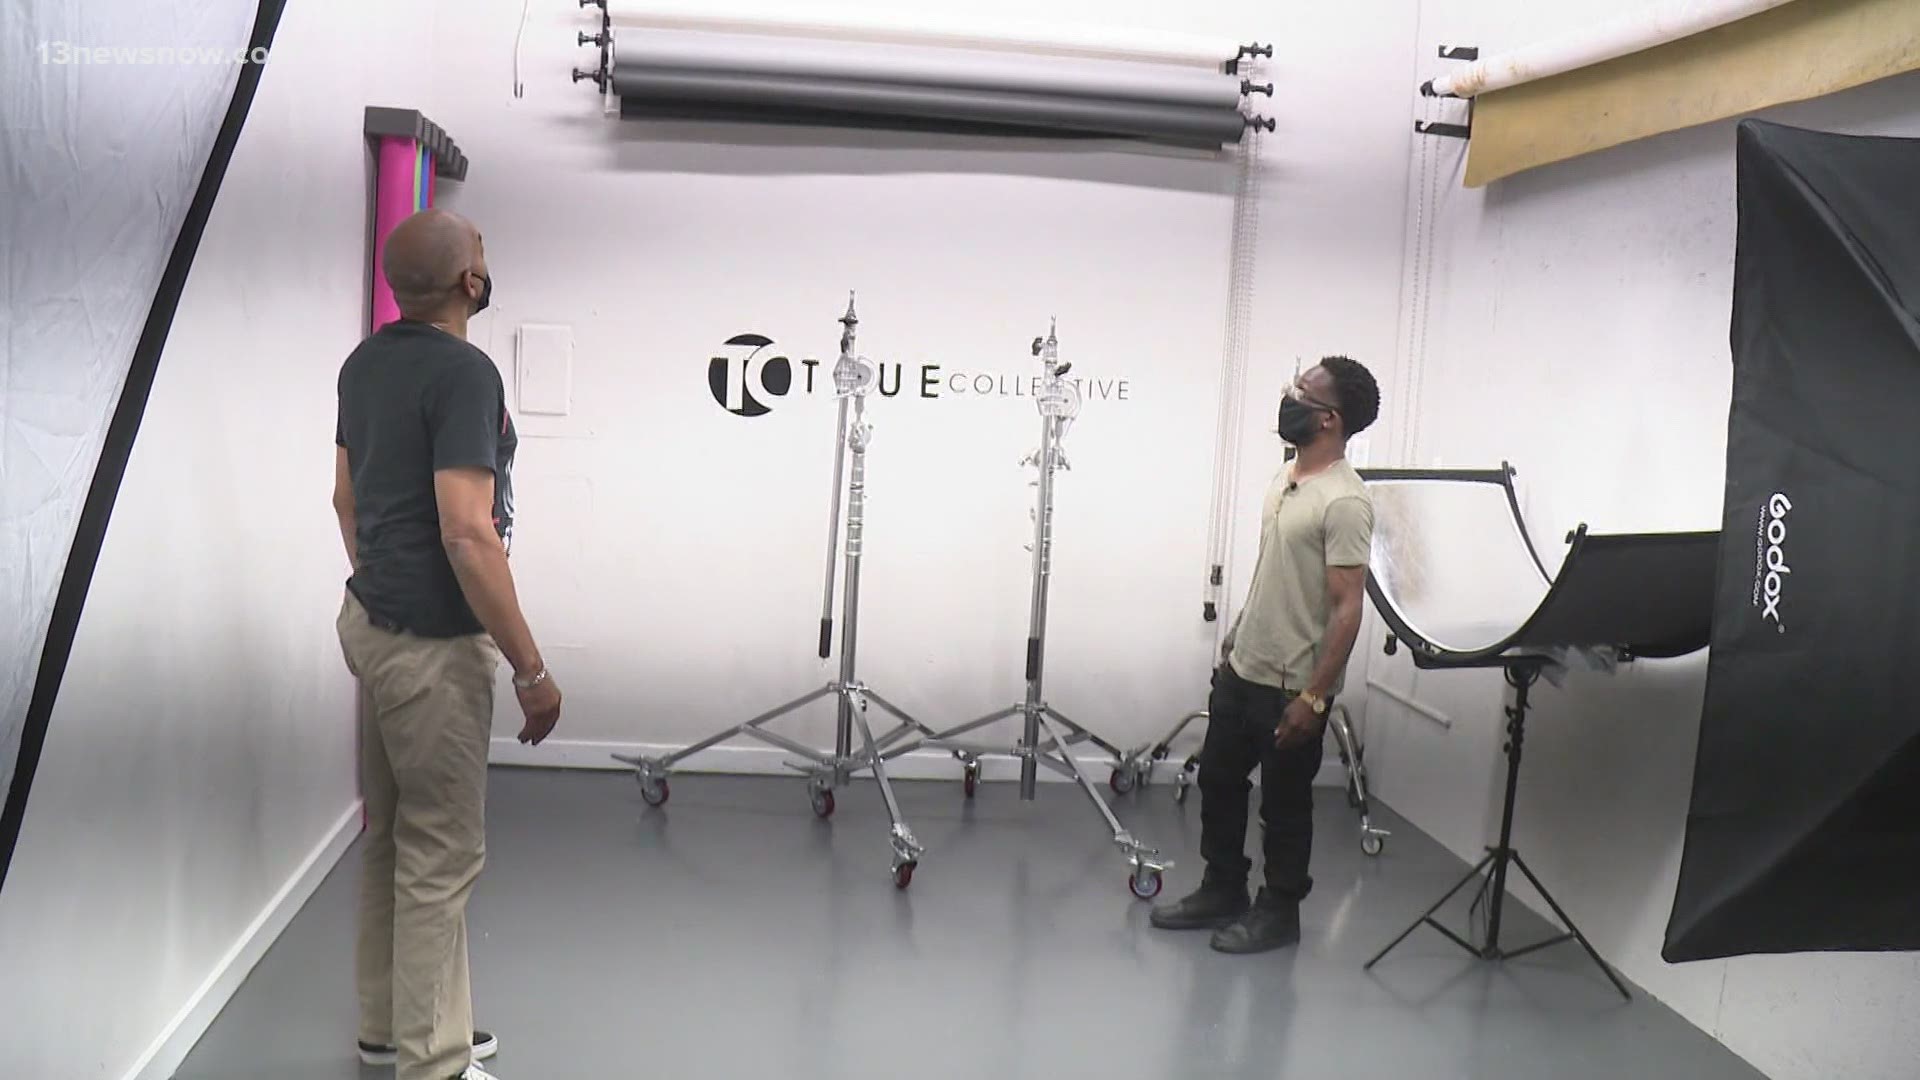 A new photography studio has opened in Hampton Roads, but it's more than just a space to rent.